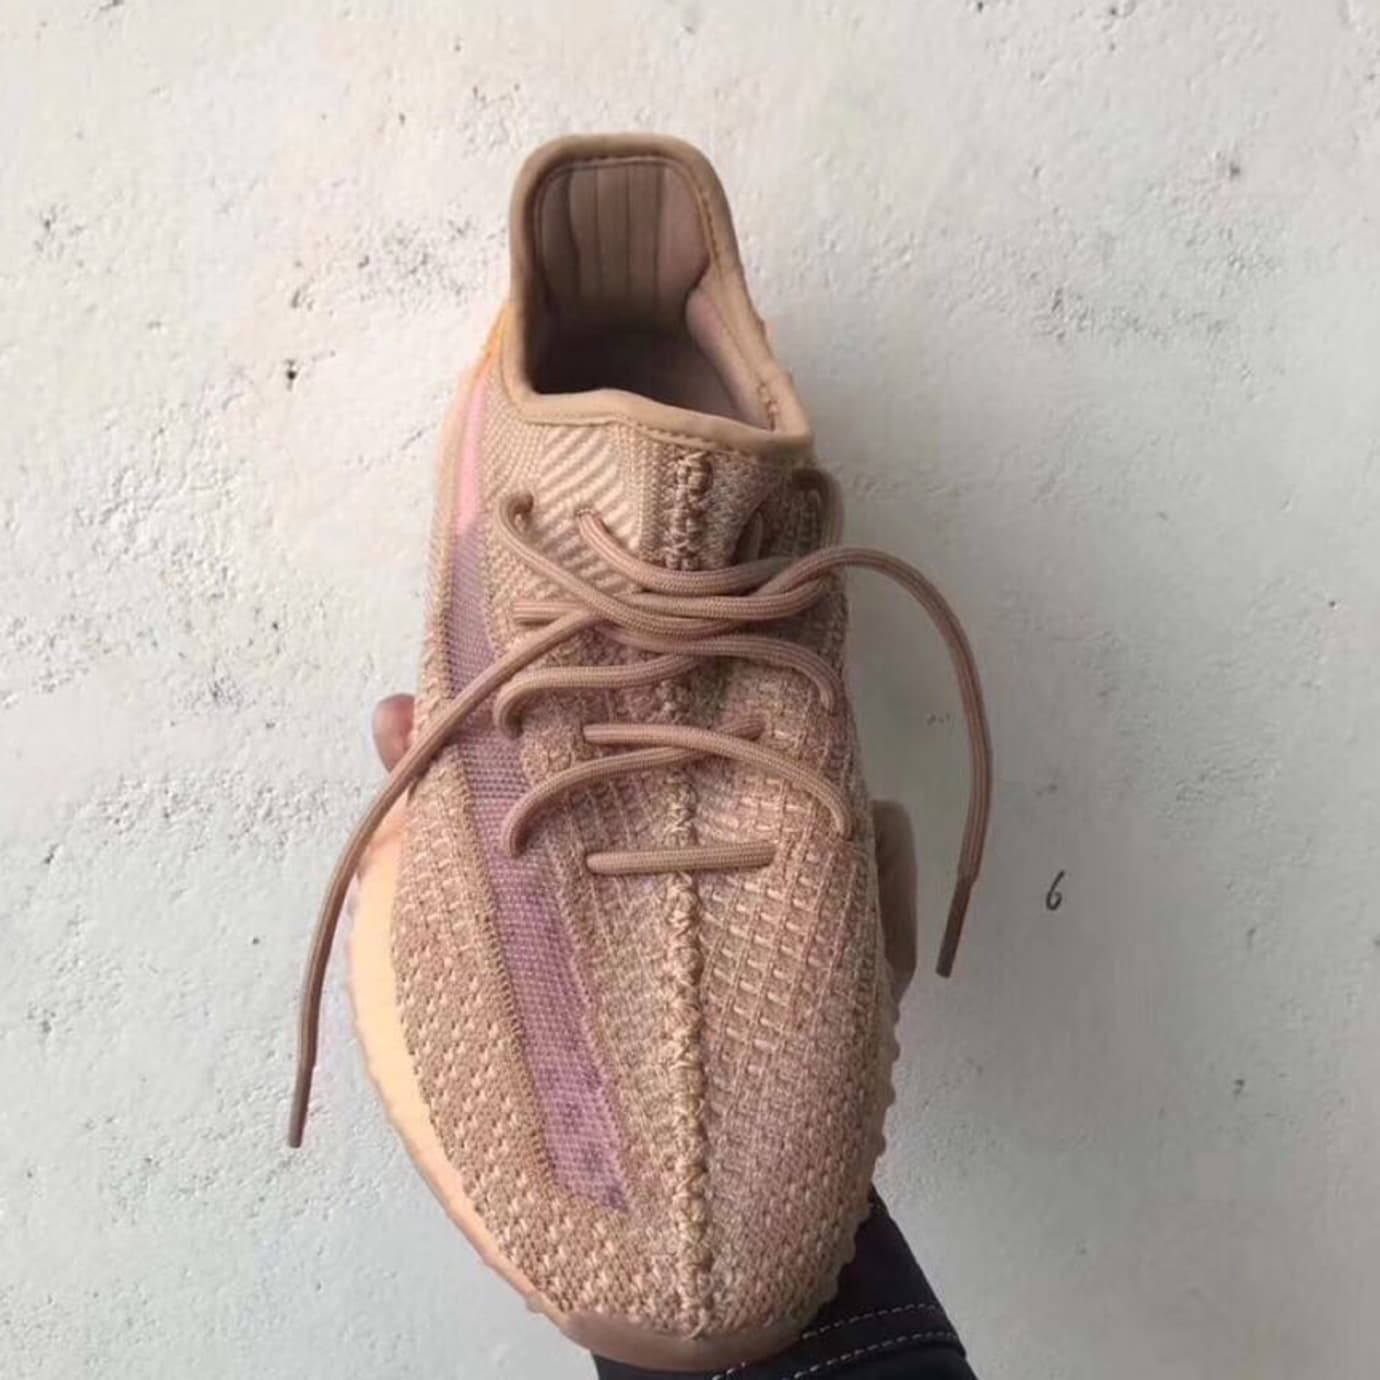 yeezy clay release time